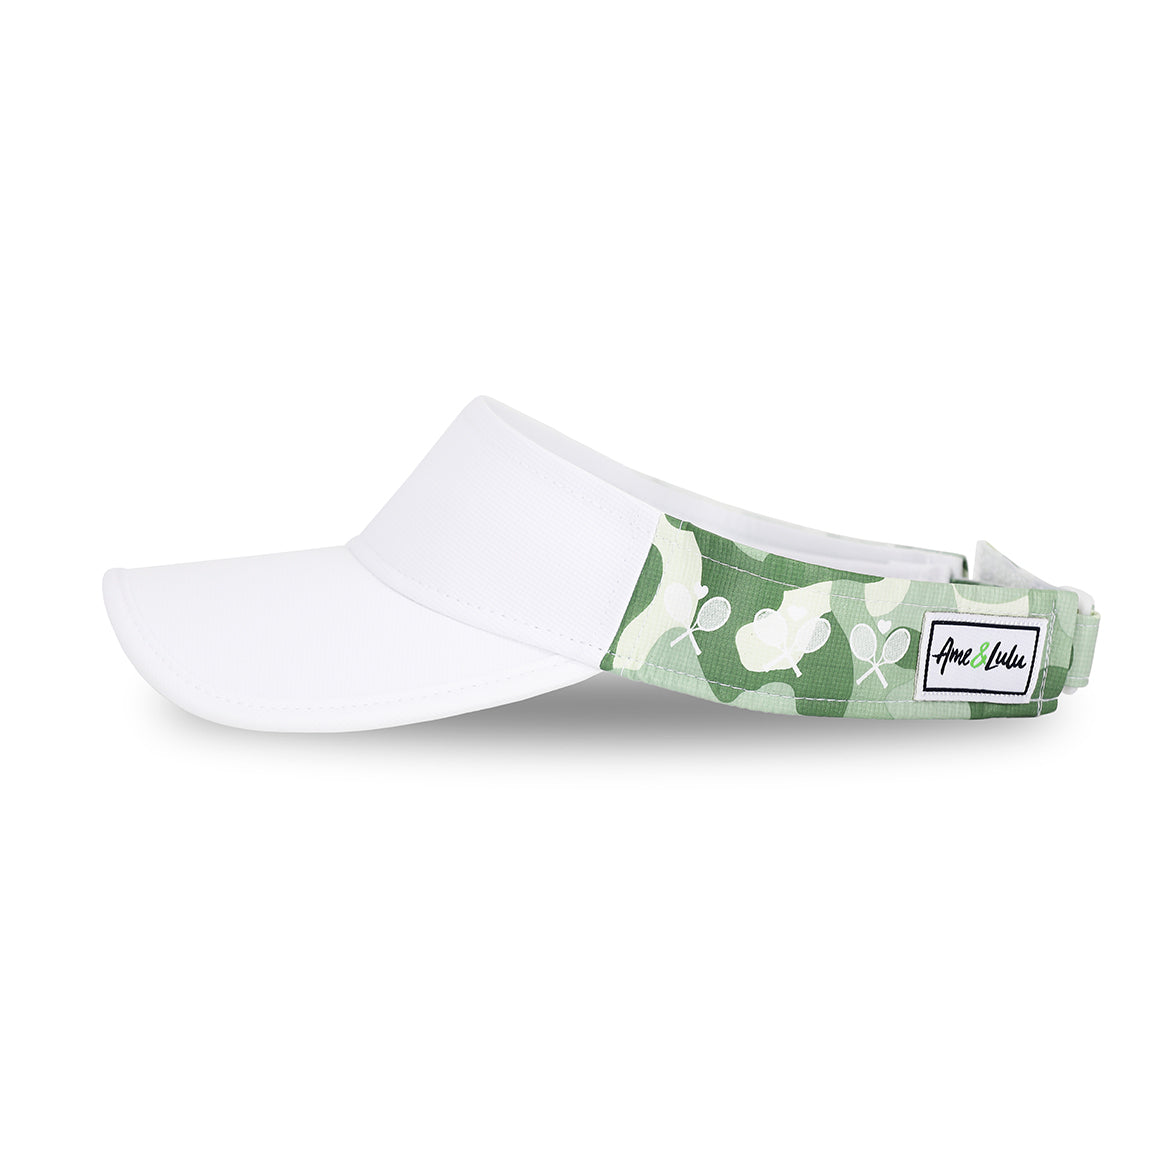 Side view of olive camo head in the game visor. Front of visor is white and sides are olive camo pattern with white crossed racquets printed over the camo.